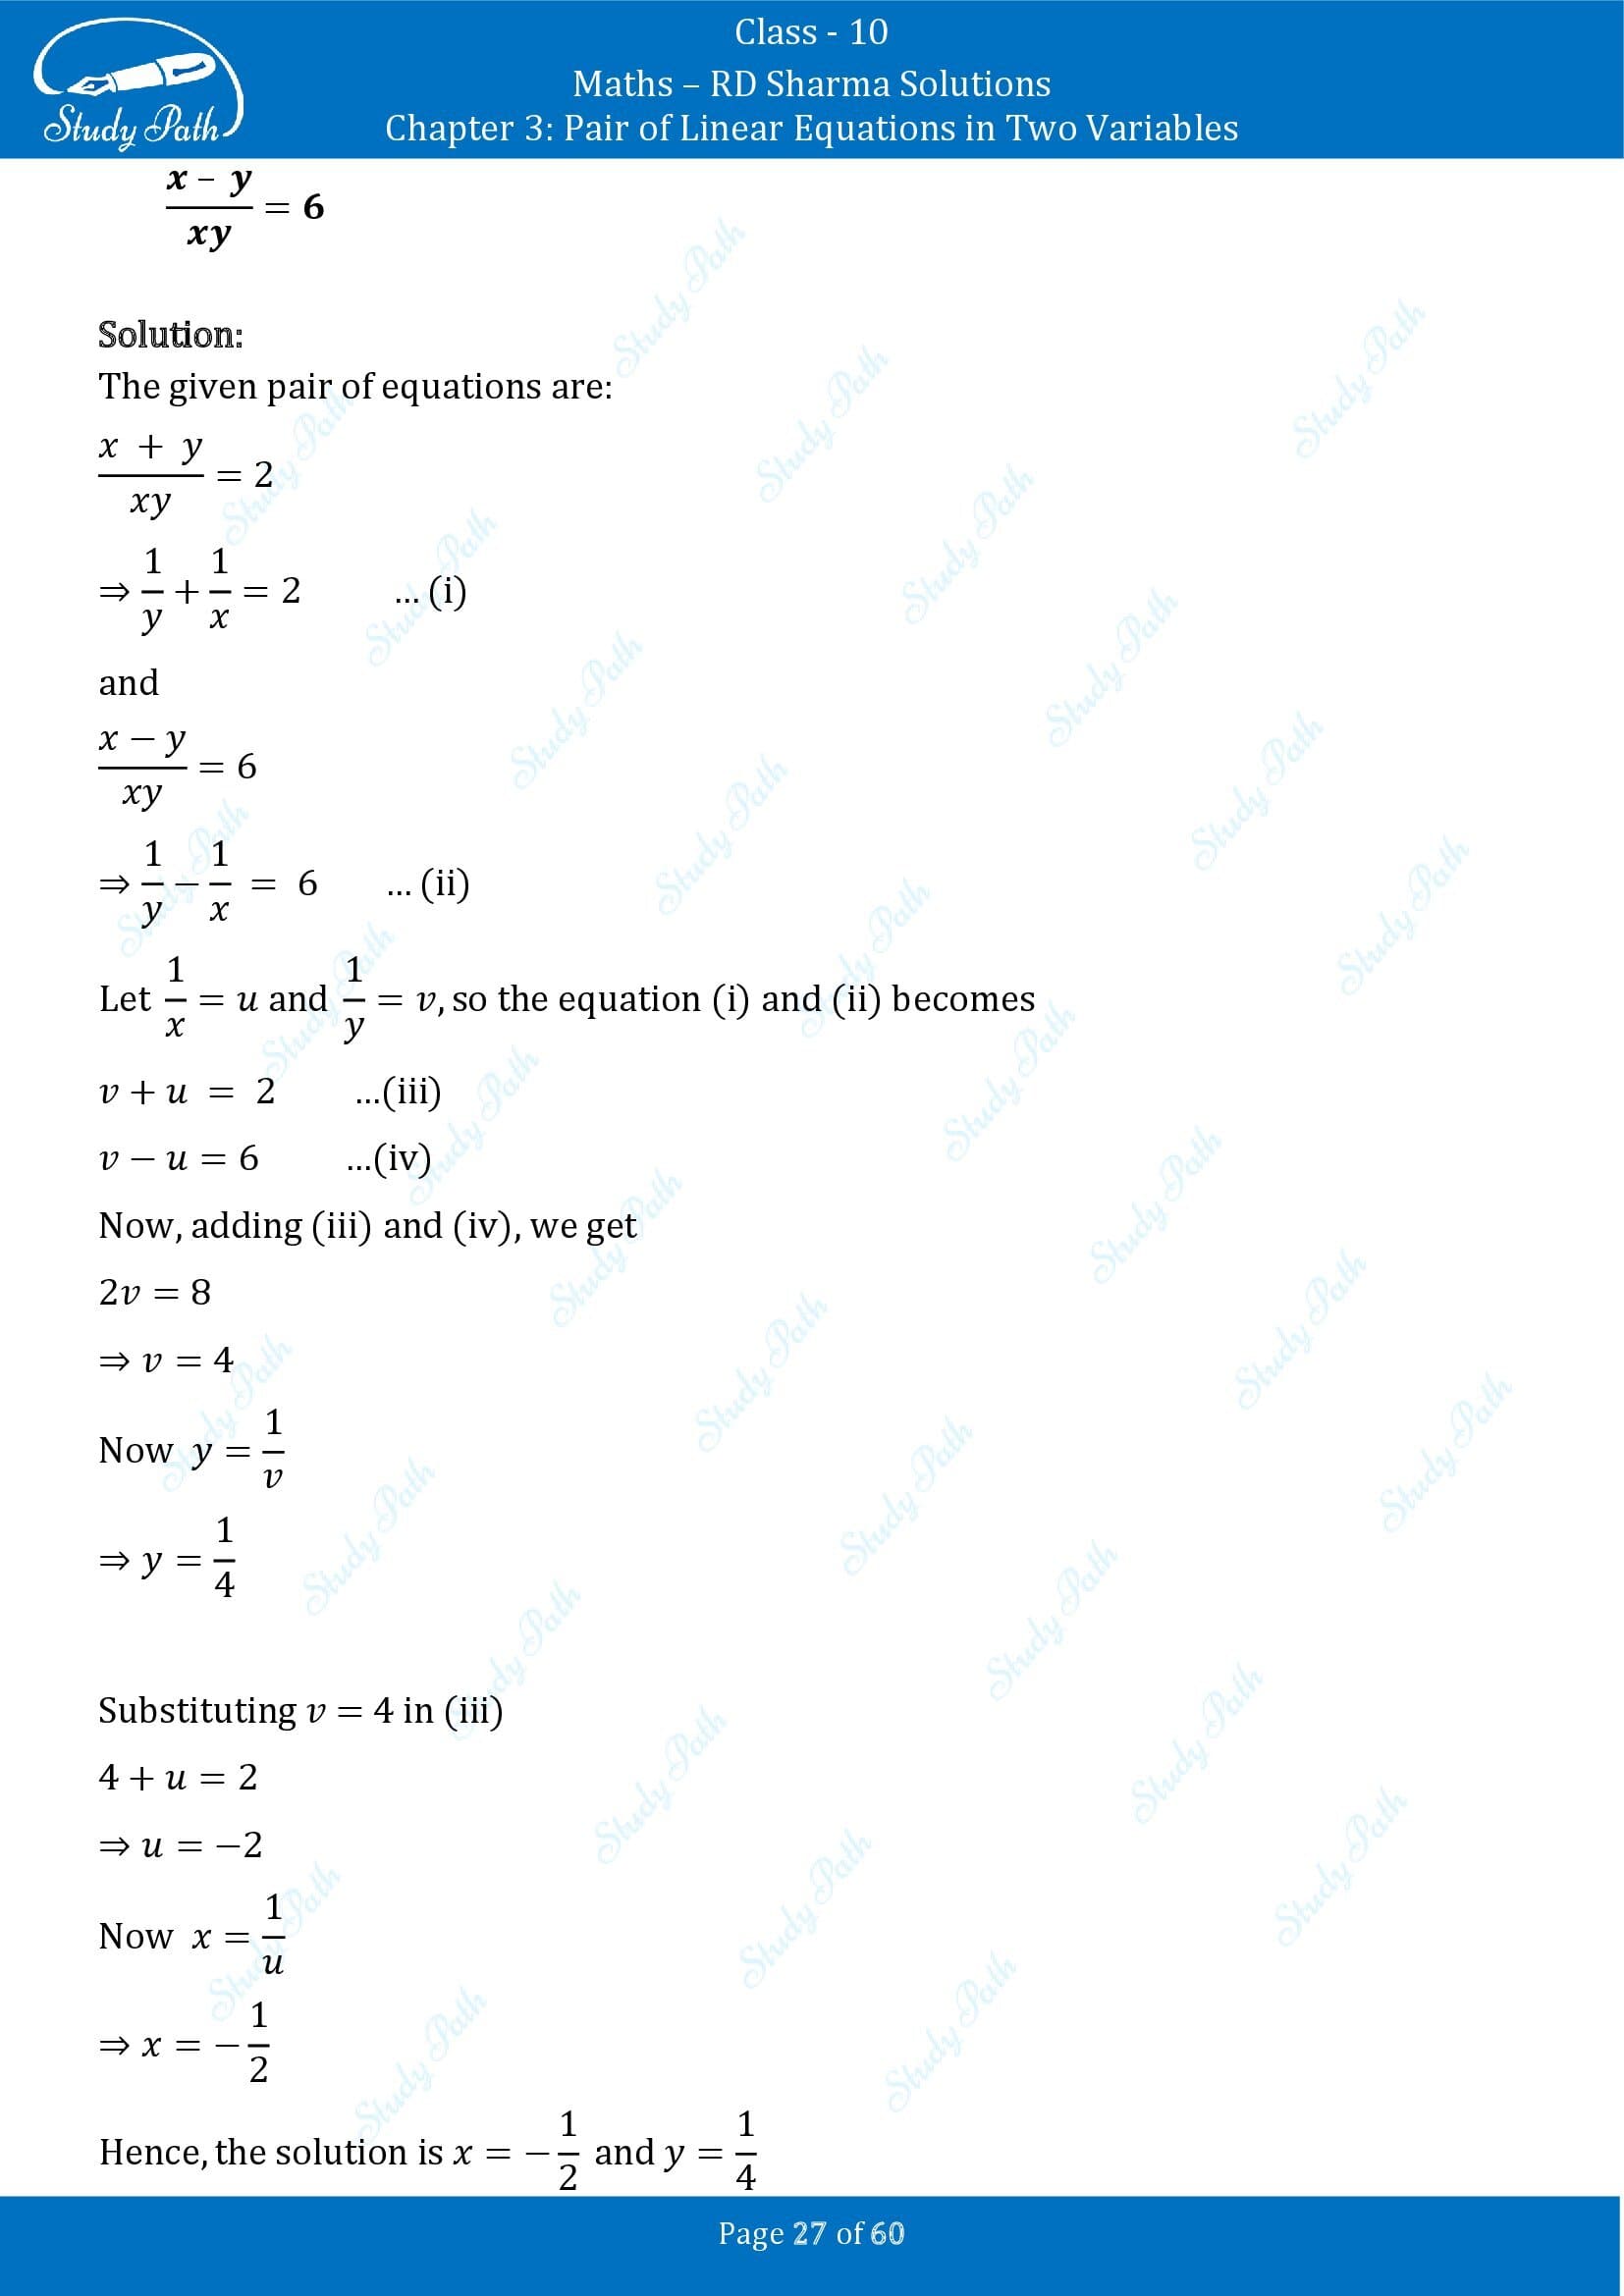 RD Sharma Solutions Class 10 Chapter 3 Pair of Linear Equations in Two Variables Exercise 3.3 00027